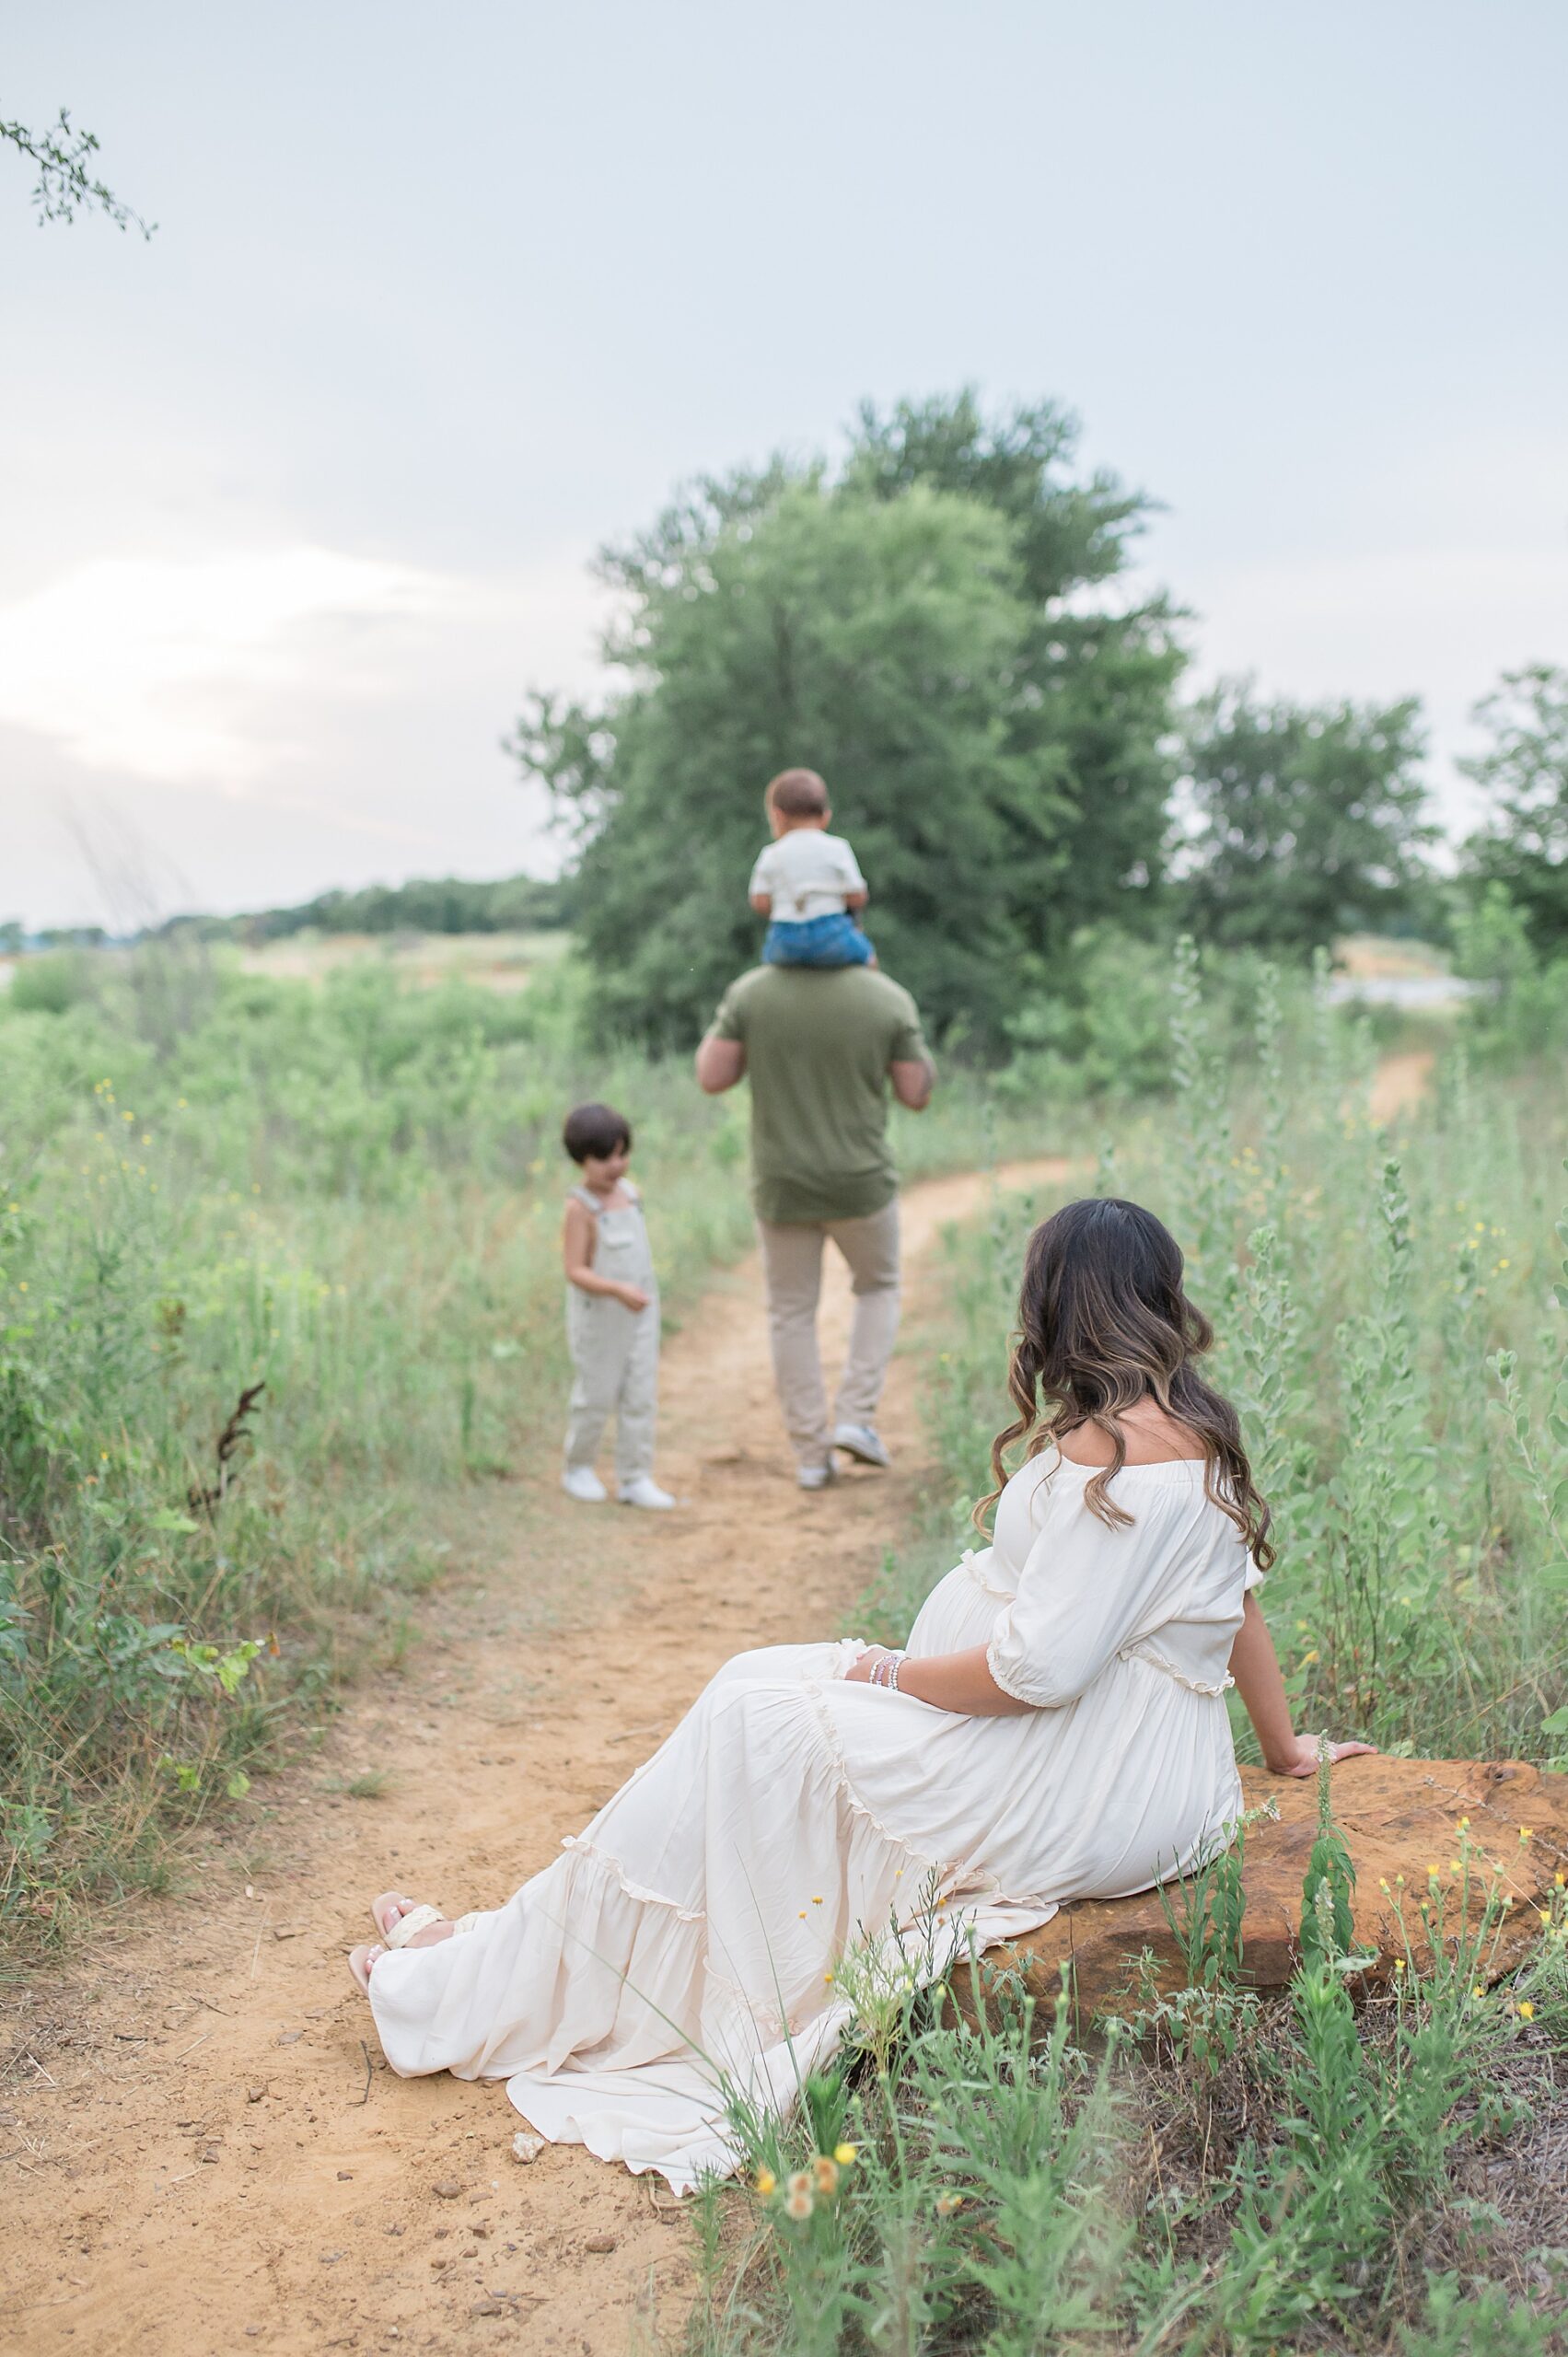 timeless family portaits taken by Lindsey Dutton Photography, a Dallas Family photographer
